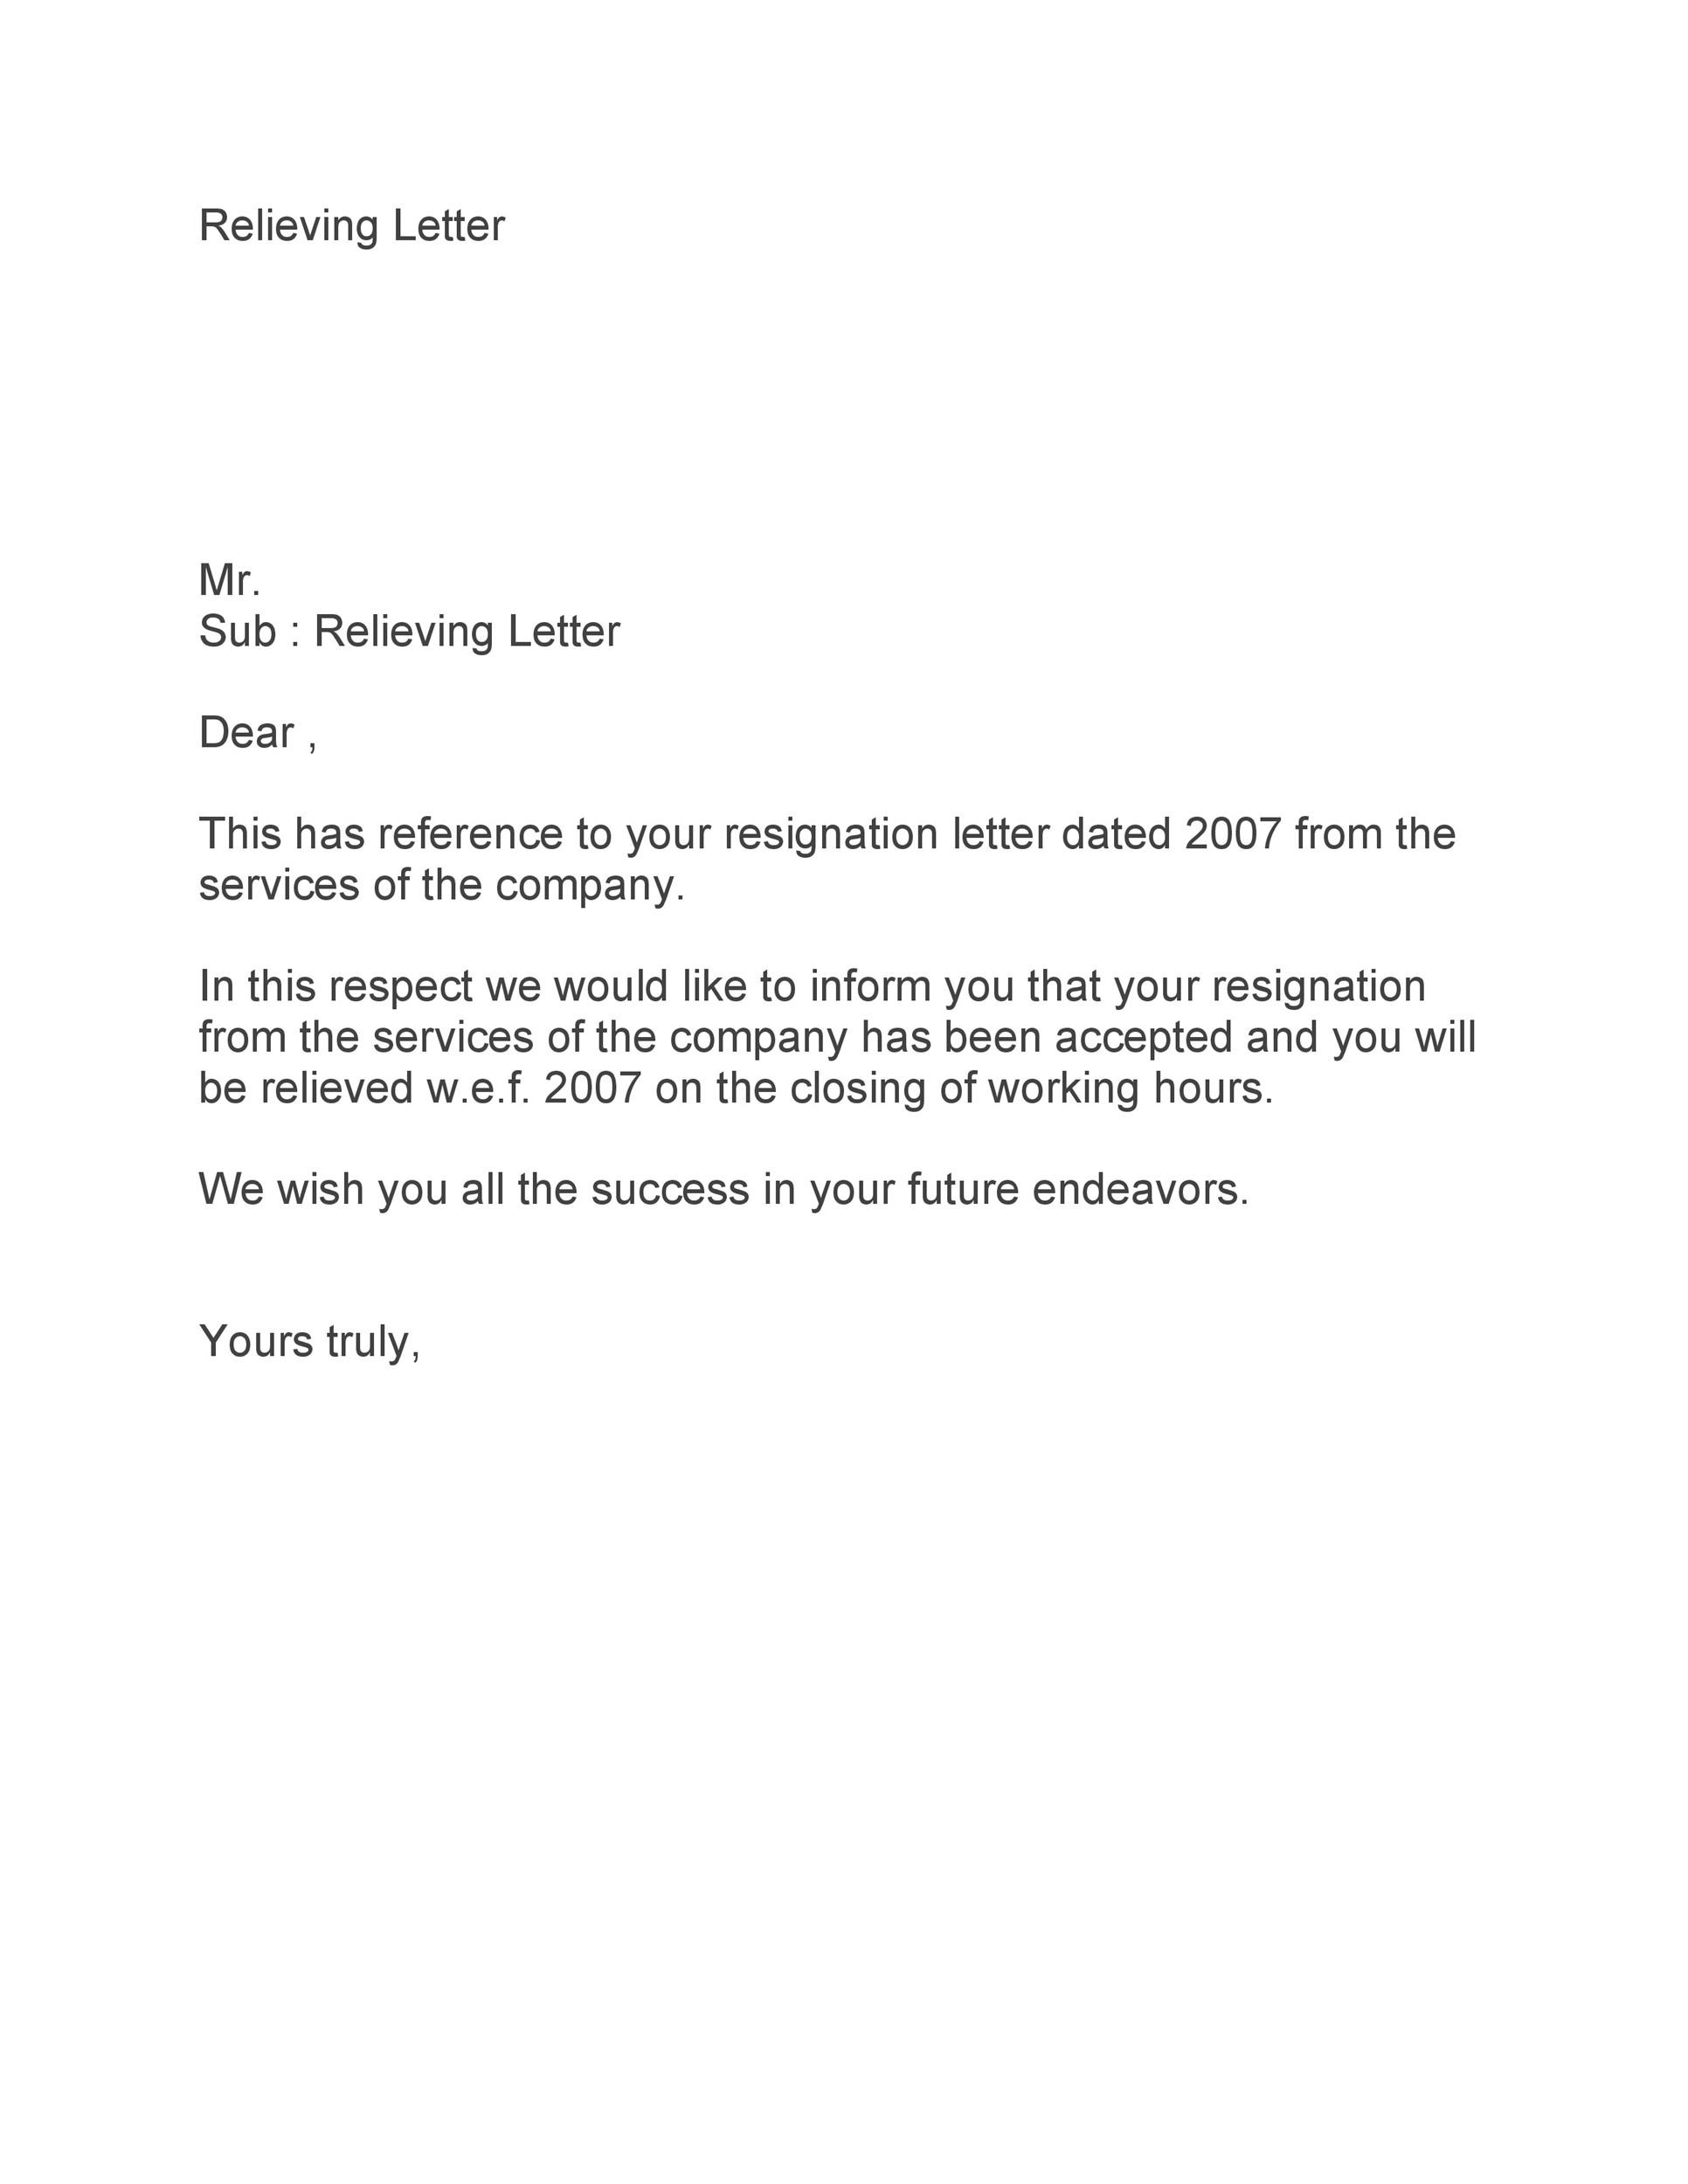 Law Firm Resignation Letter from templatelab.com